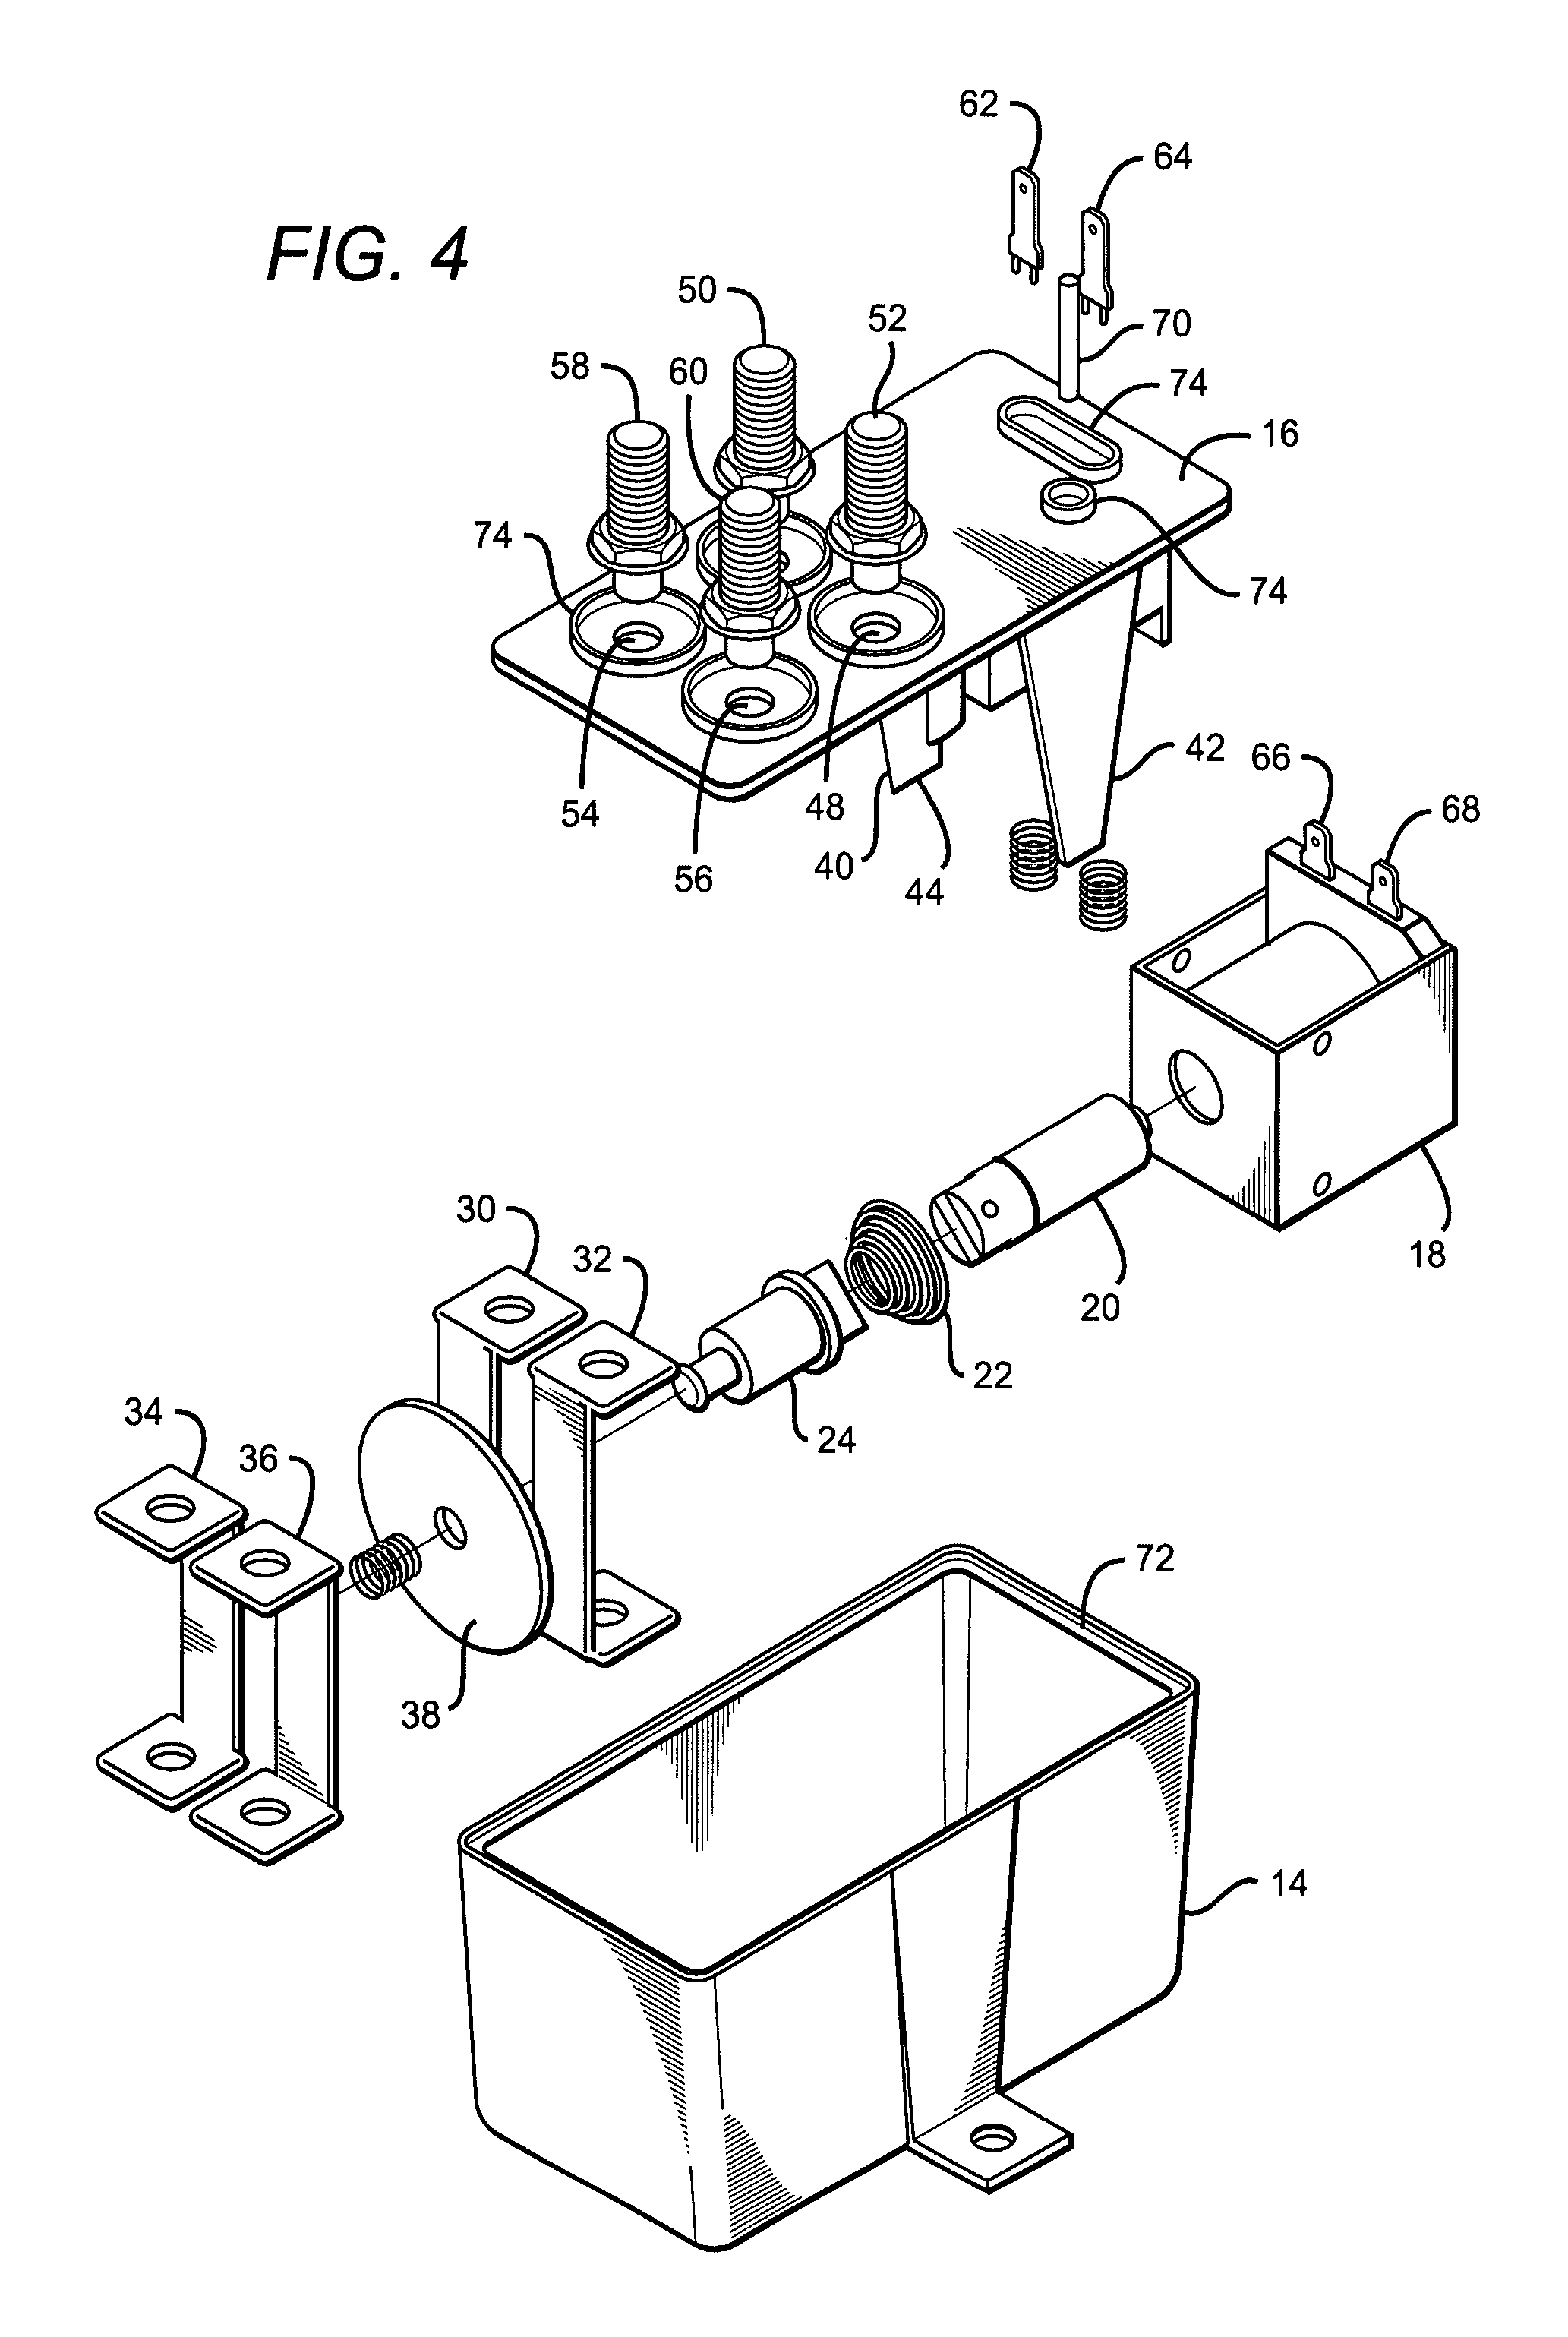 Hermetically sealed relay having low permeability plastic housing